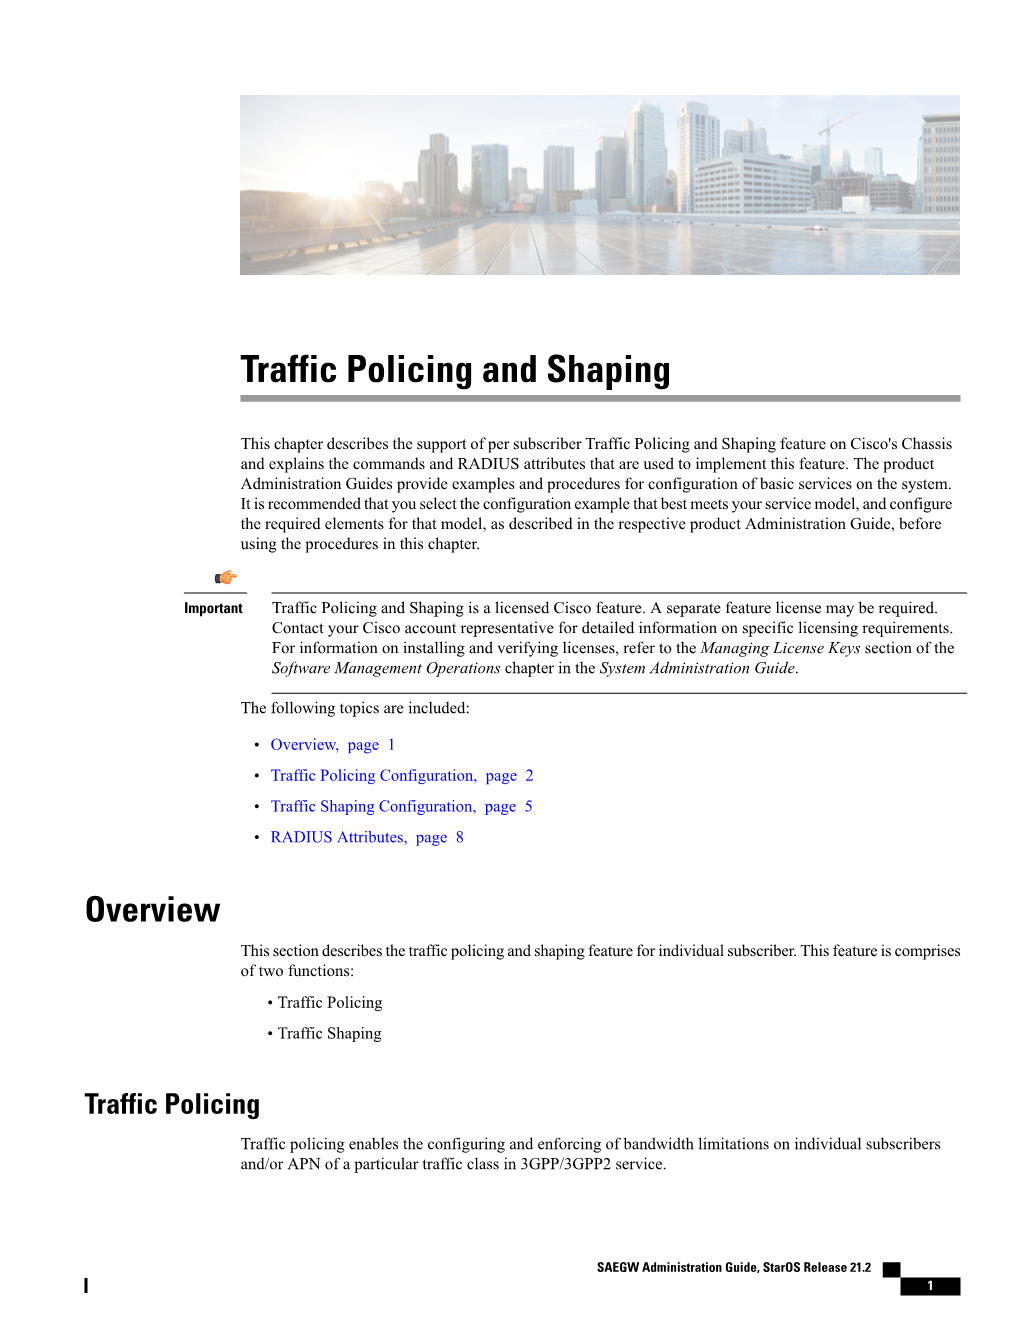 Traffic Policing and Shaping